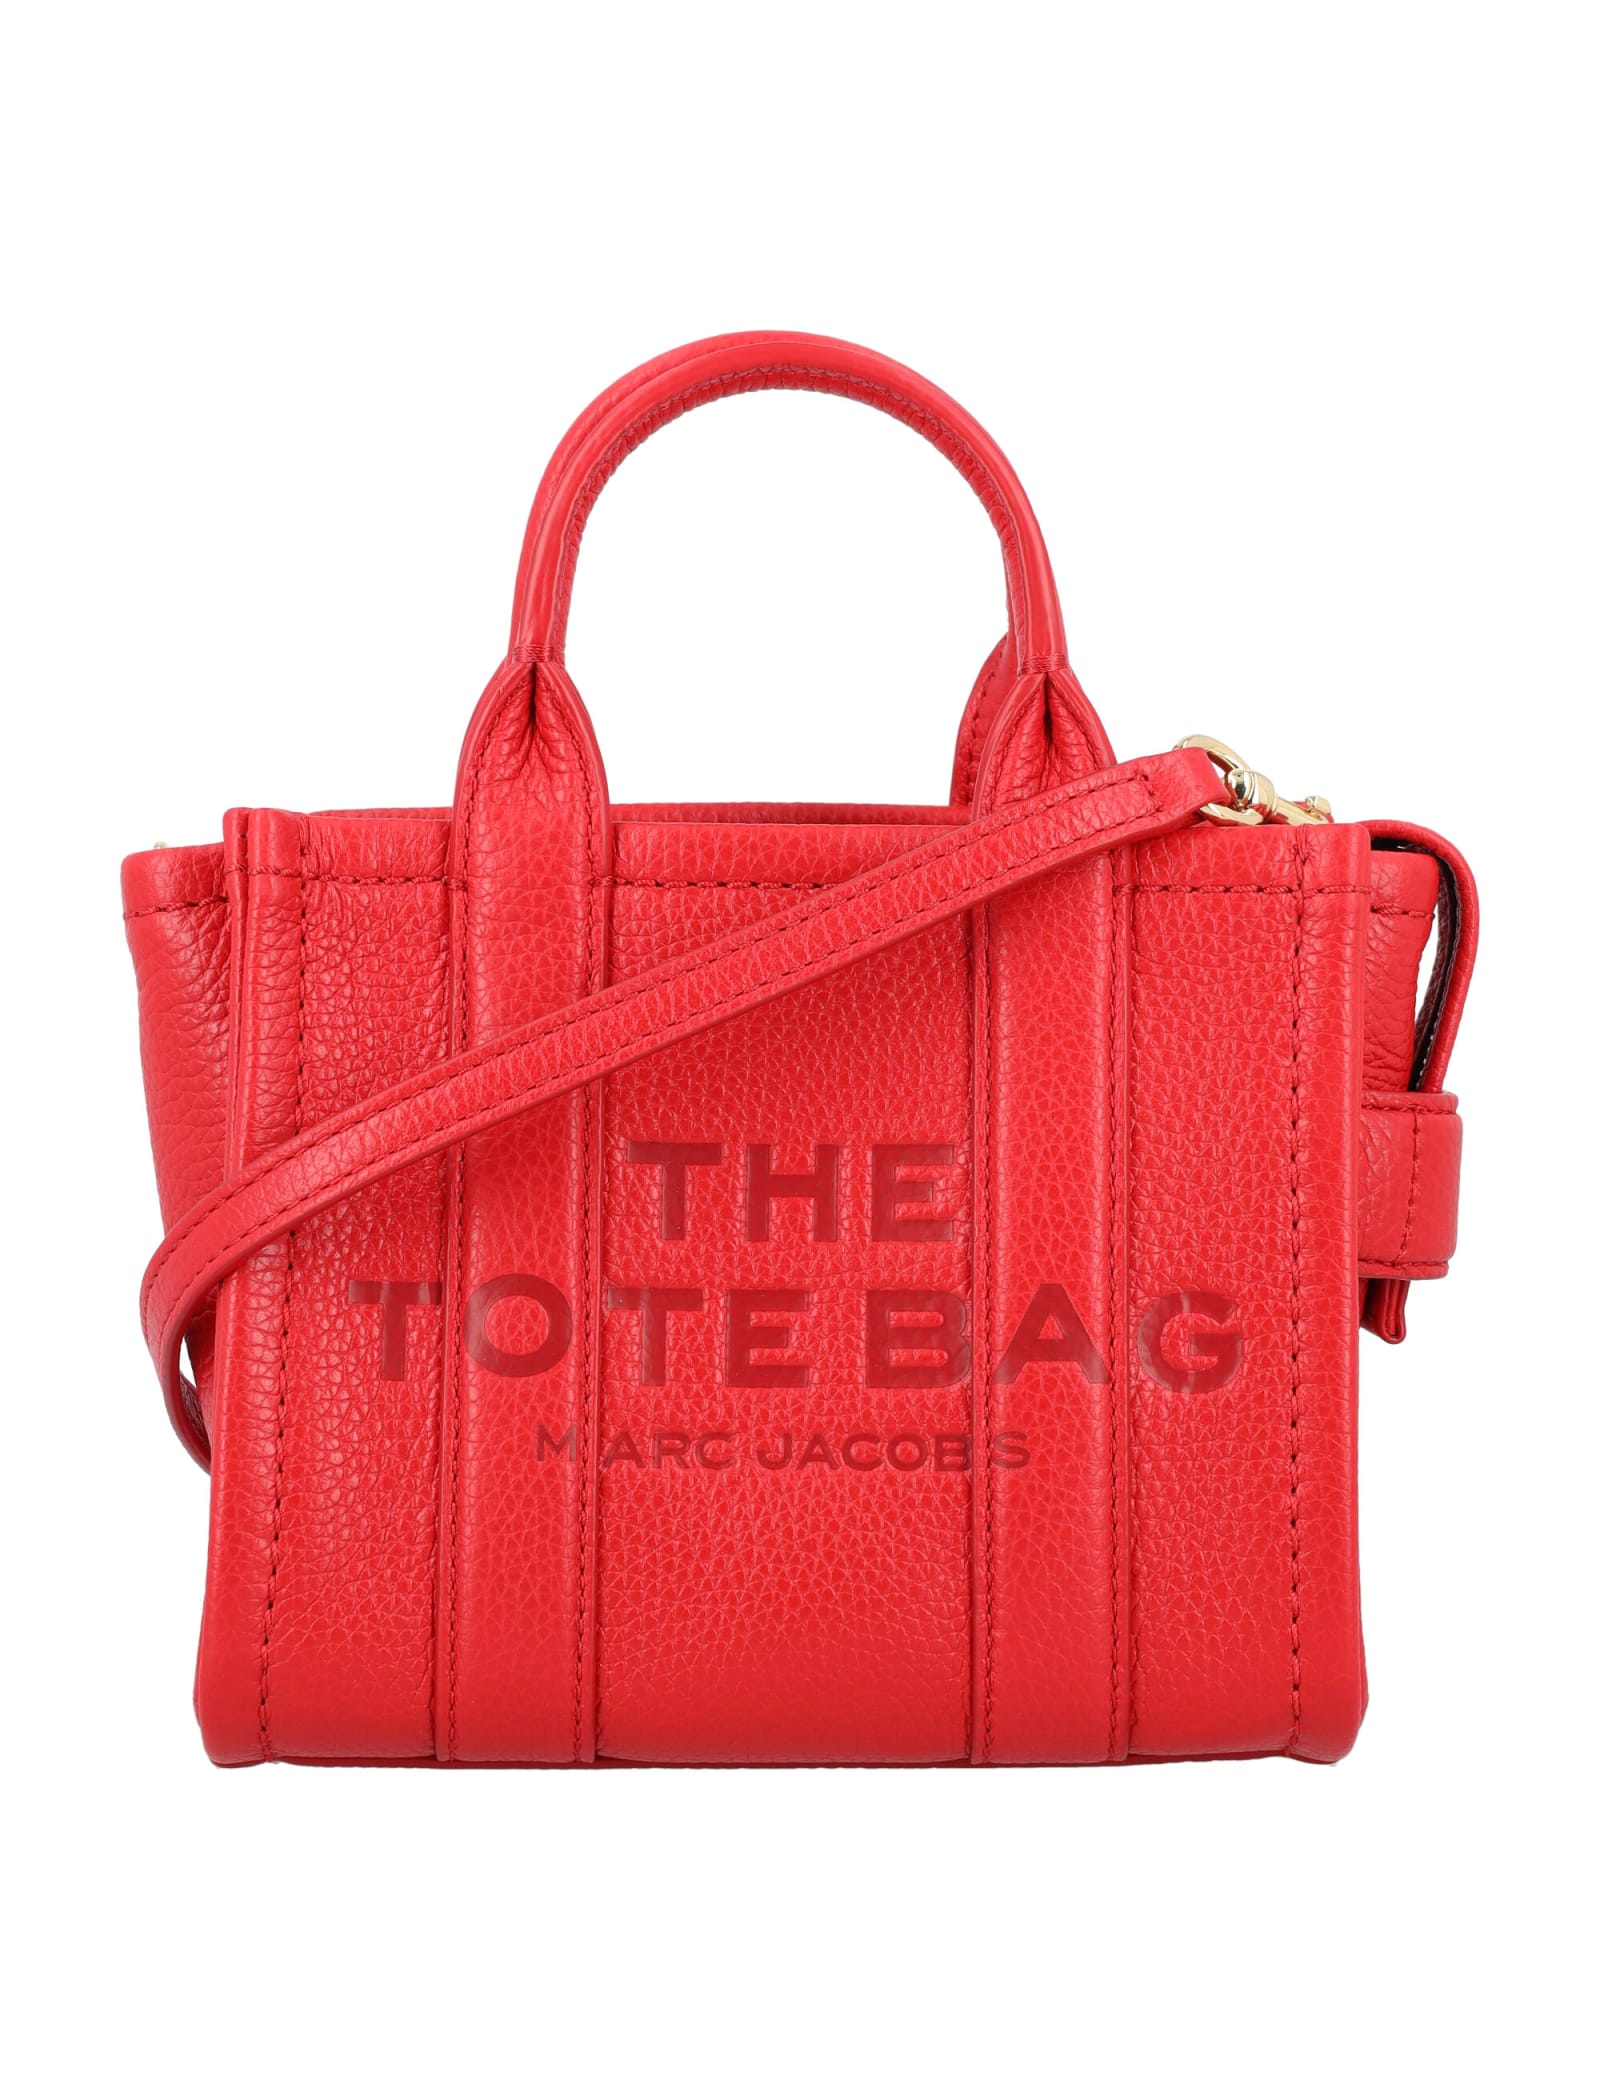 MARC JACOBS THE MICRO TOTE LEATHER BAG